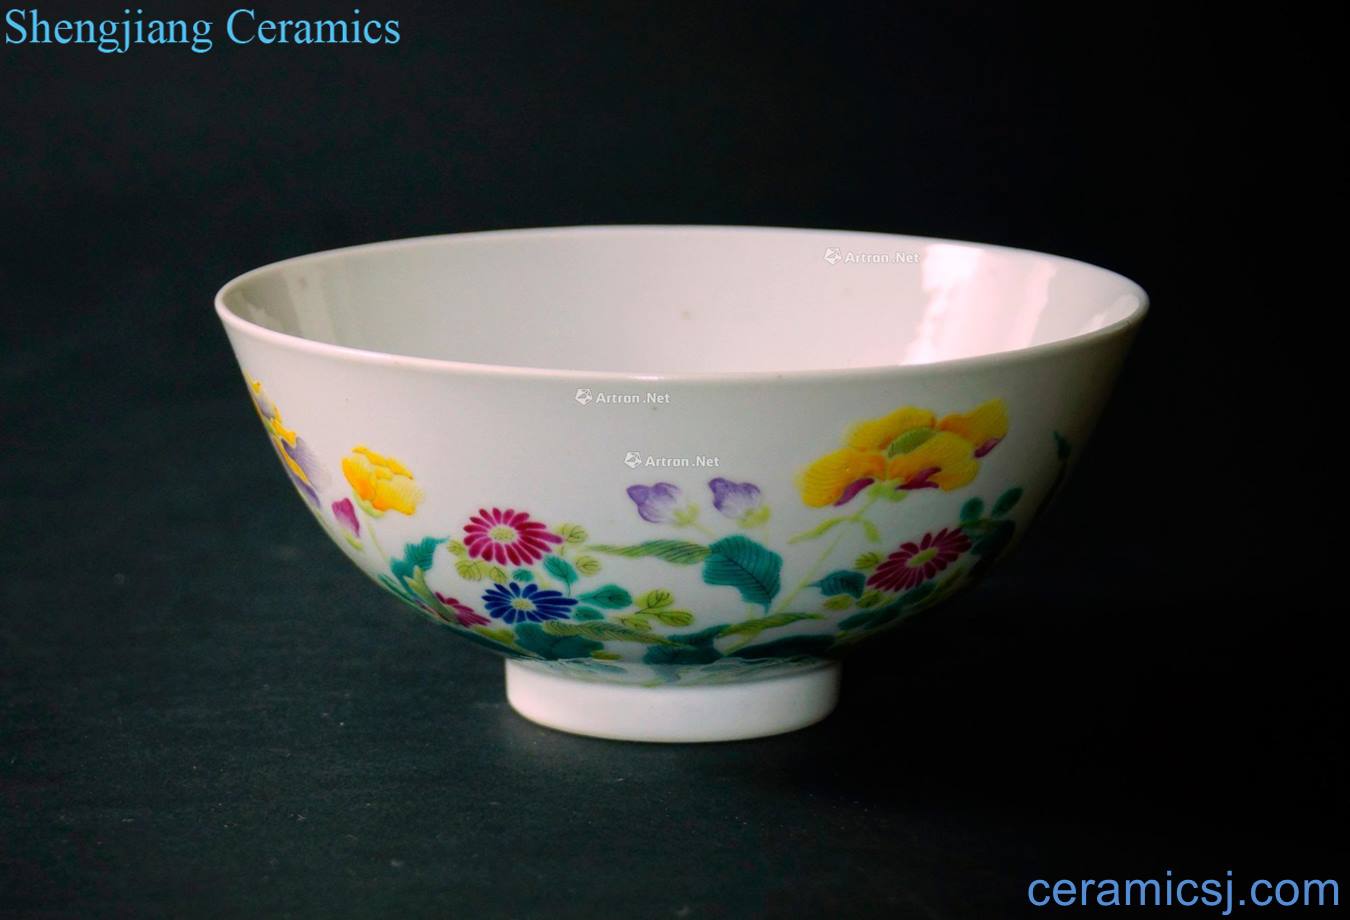 In the 19th century famille rose bowl